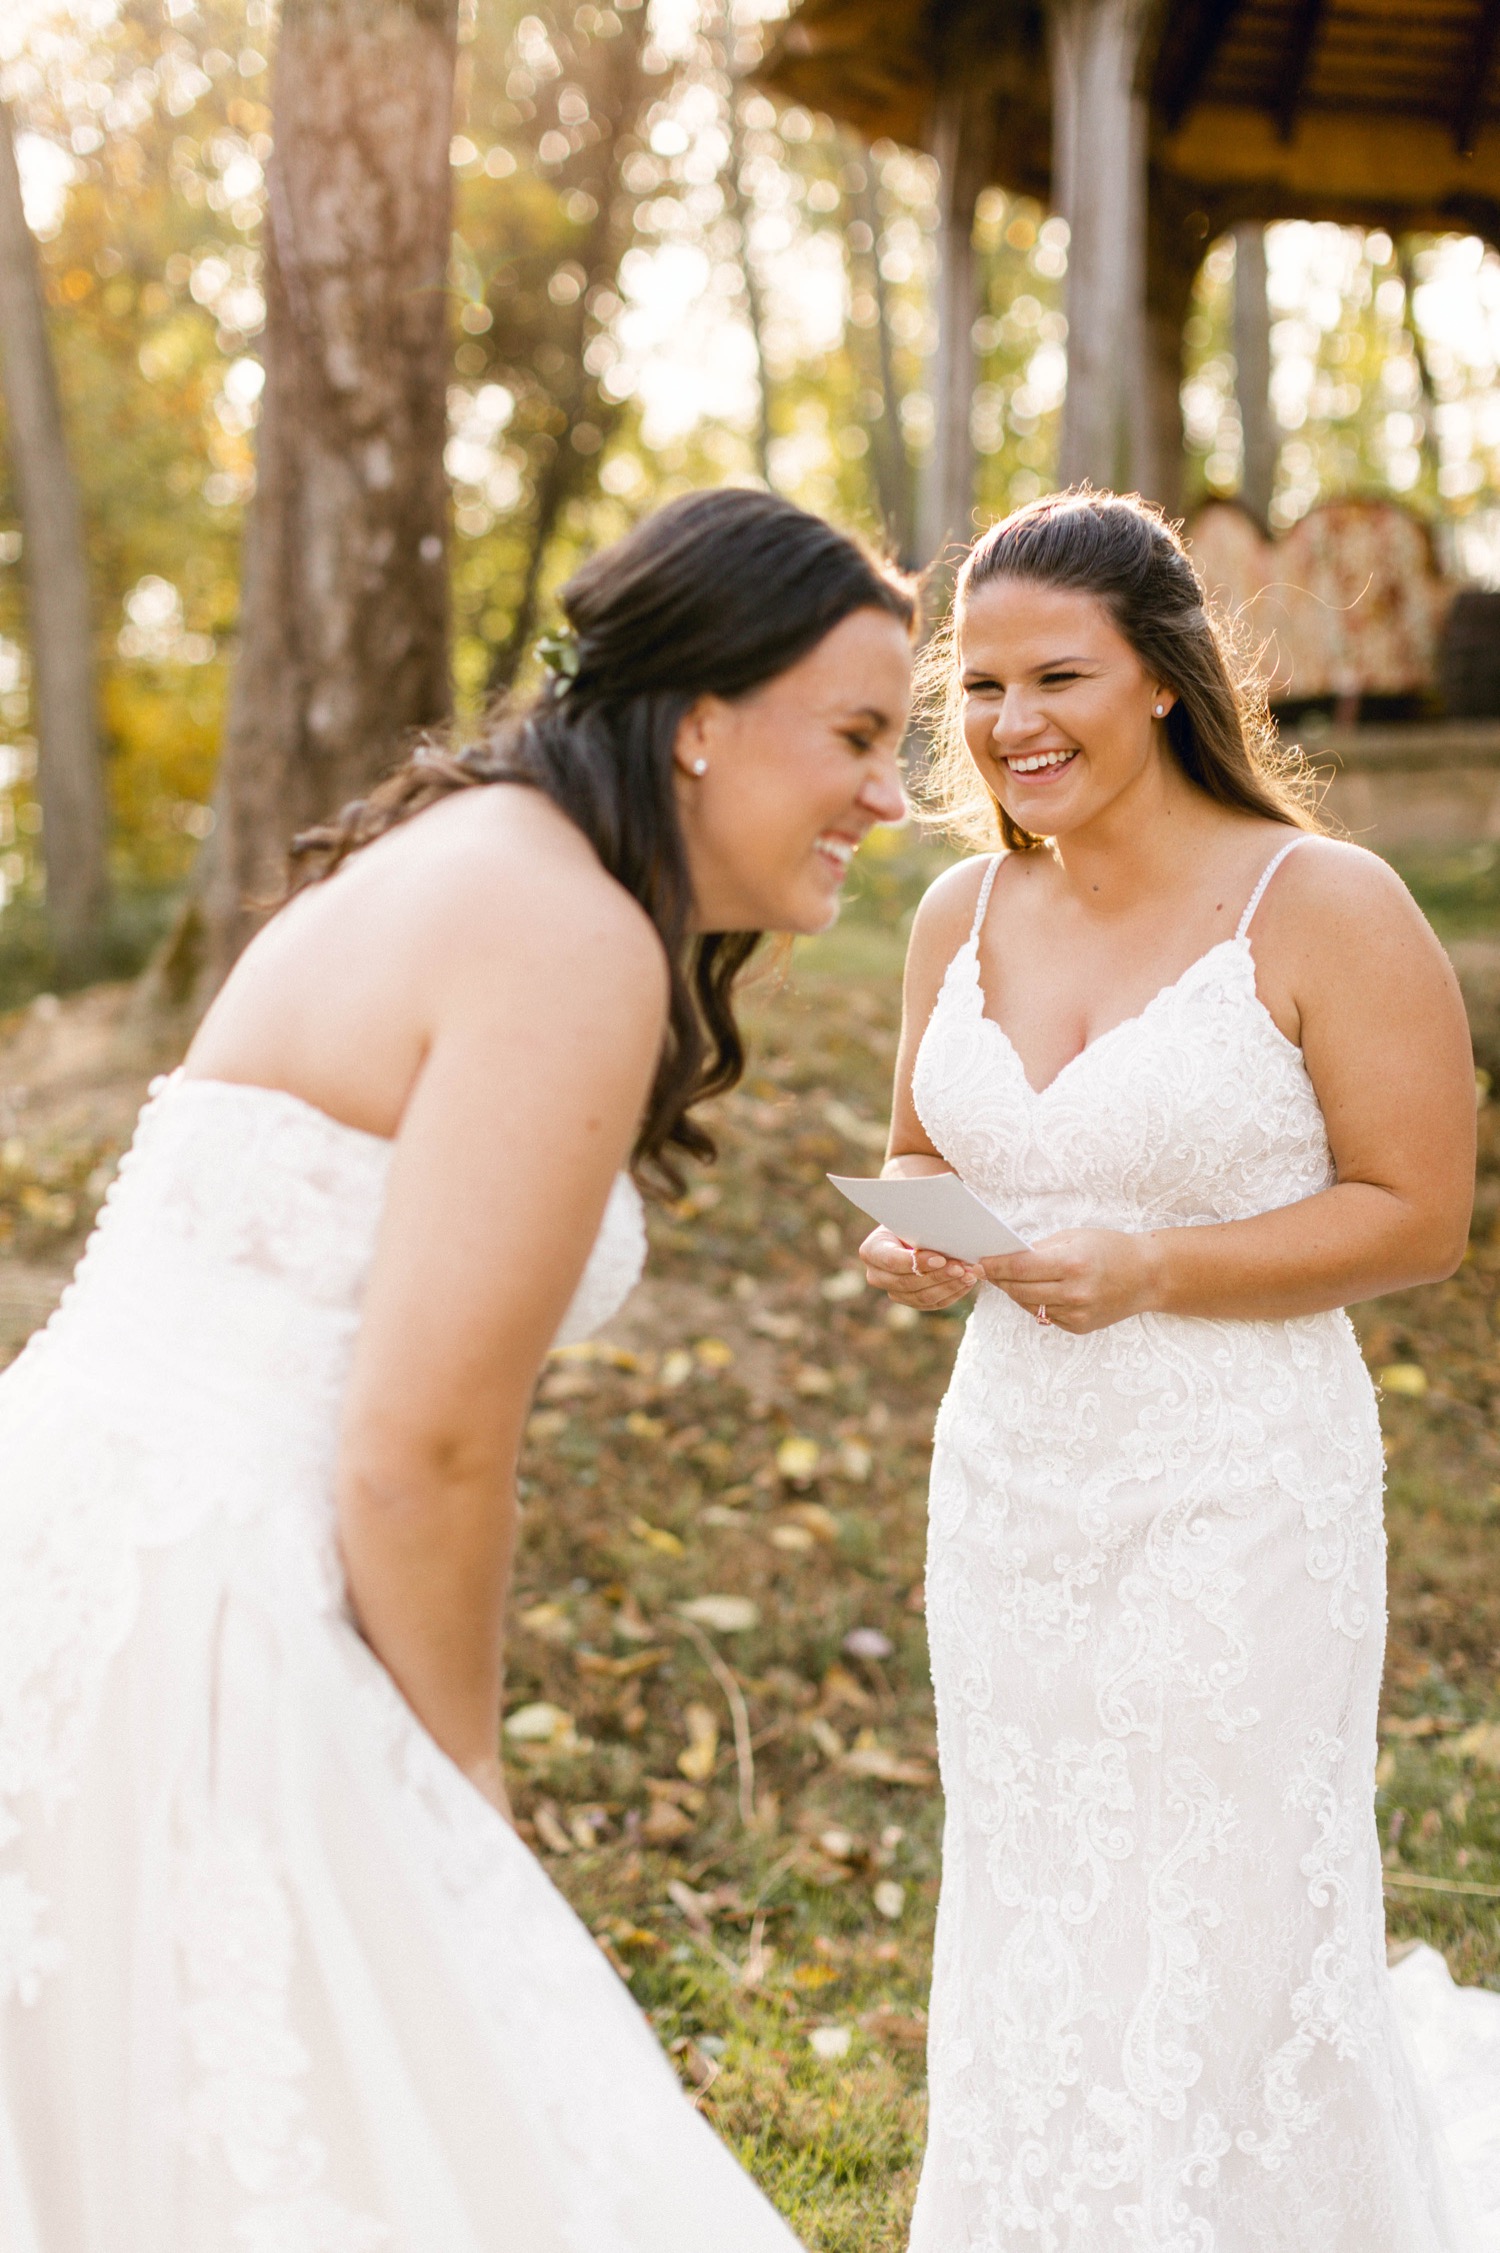 outdoor woodsy fall wedding brides reading vows laughing